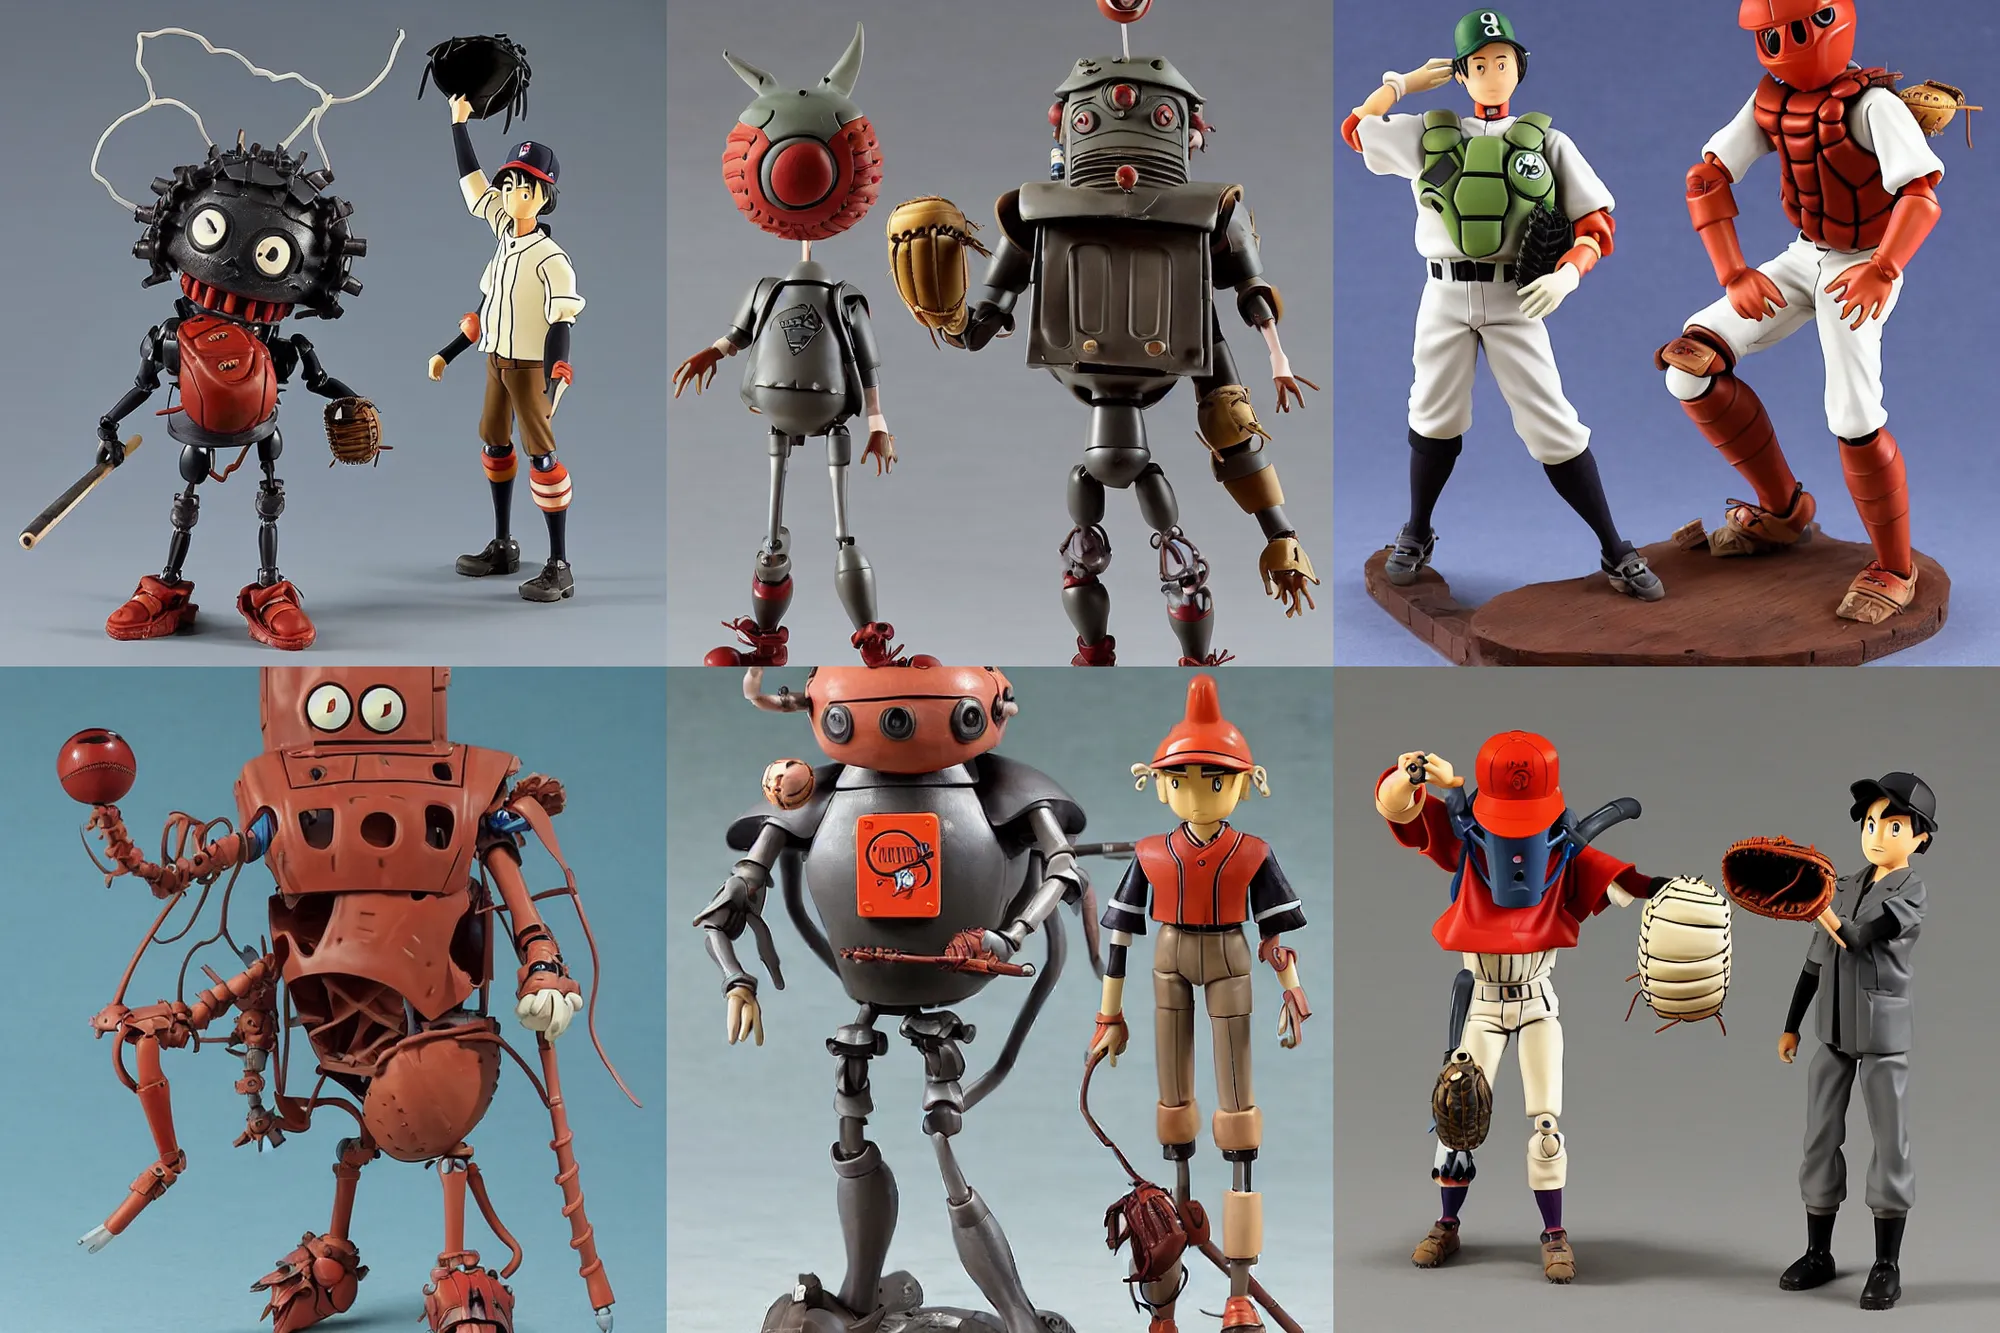 Prompt: A Lovecraftian scary giant mechanized adorable baseball player from Studio Ghibli Howl's Moving Castle (2004) as a 1980's Kenner style action figure, 5 points of articulation, full body, 4k, highly detailed. award winning sci-fi. look at all that detail!